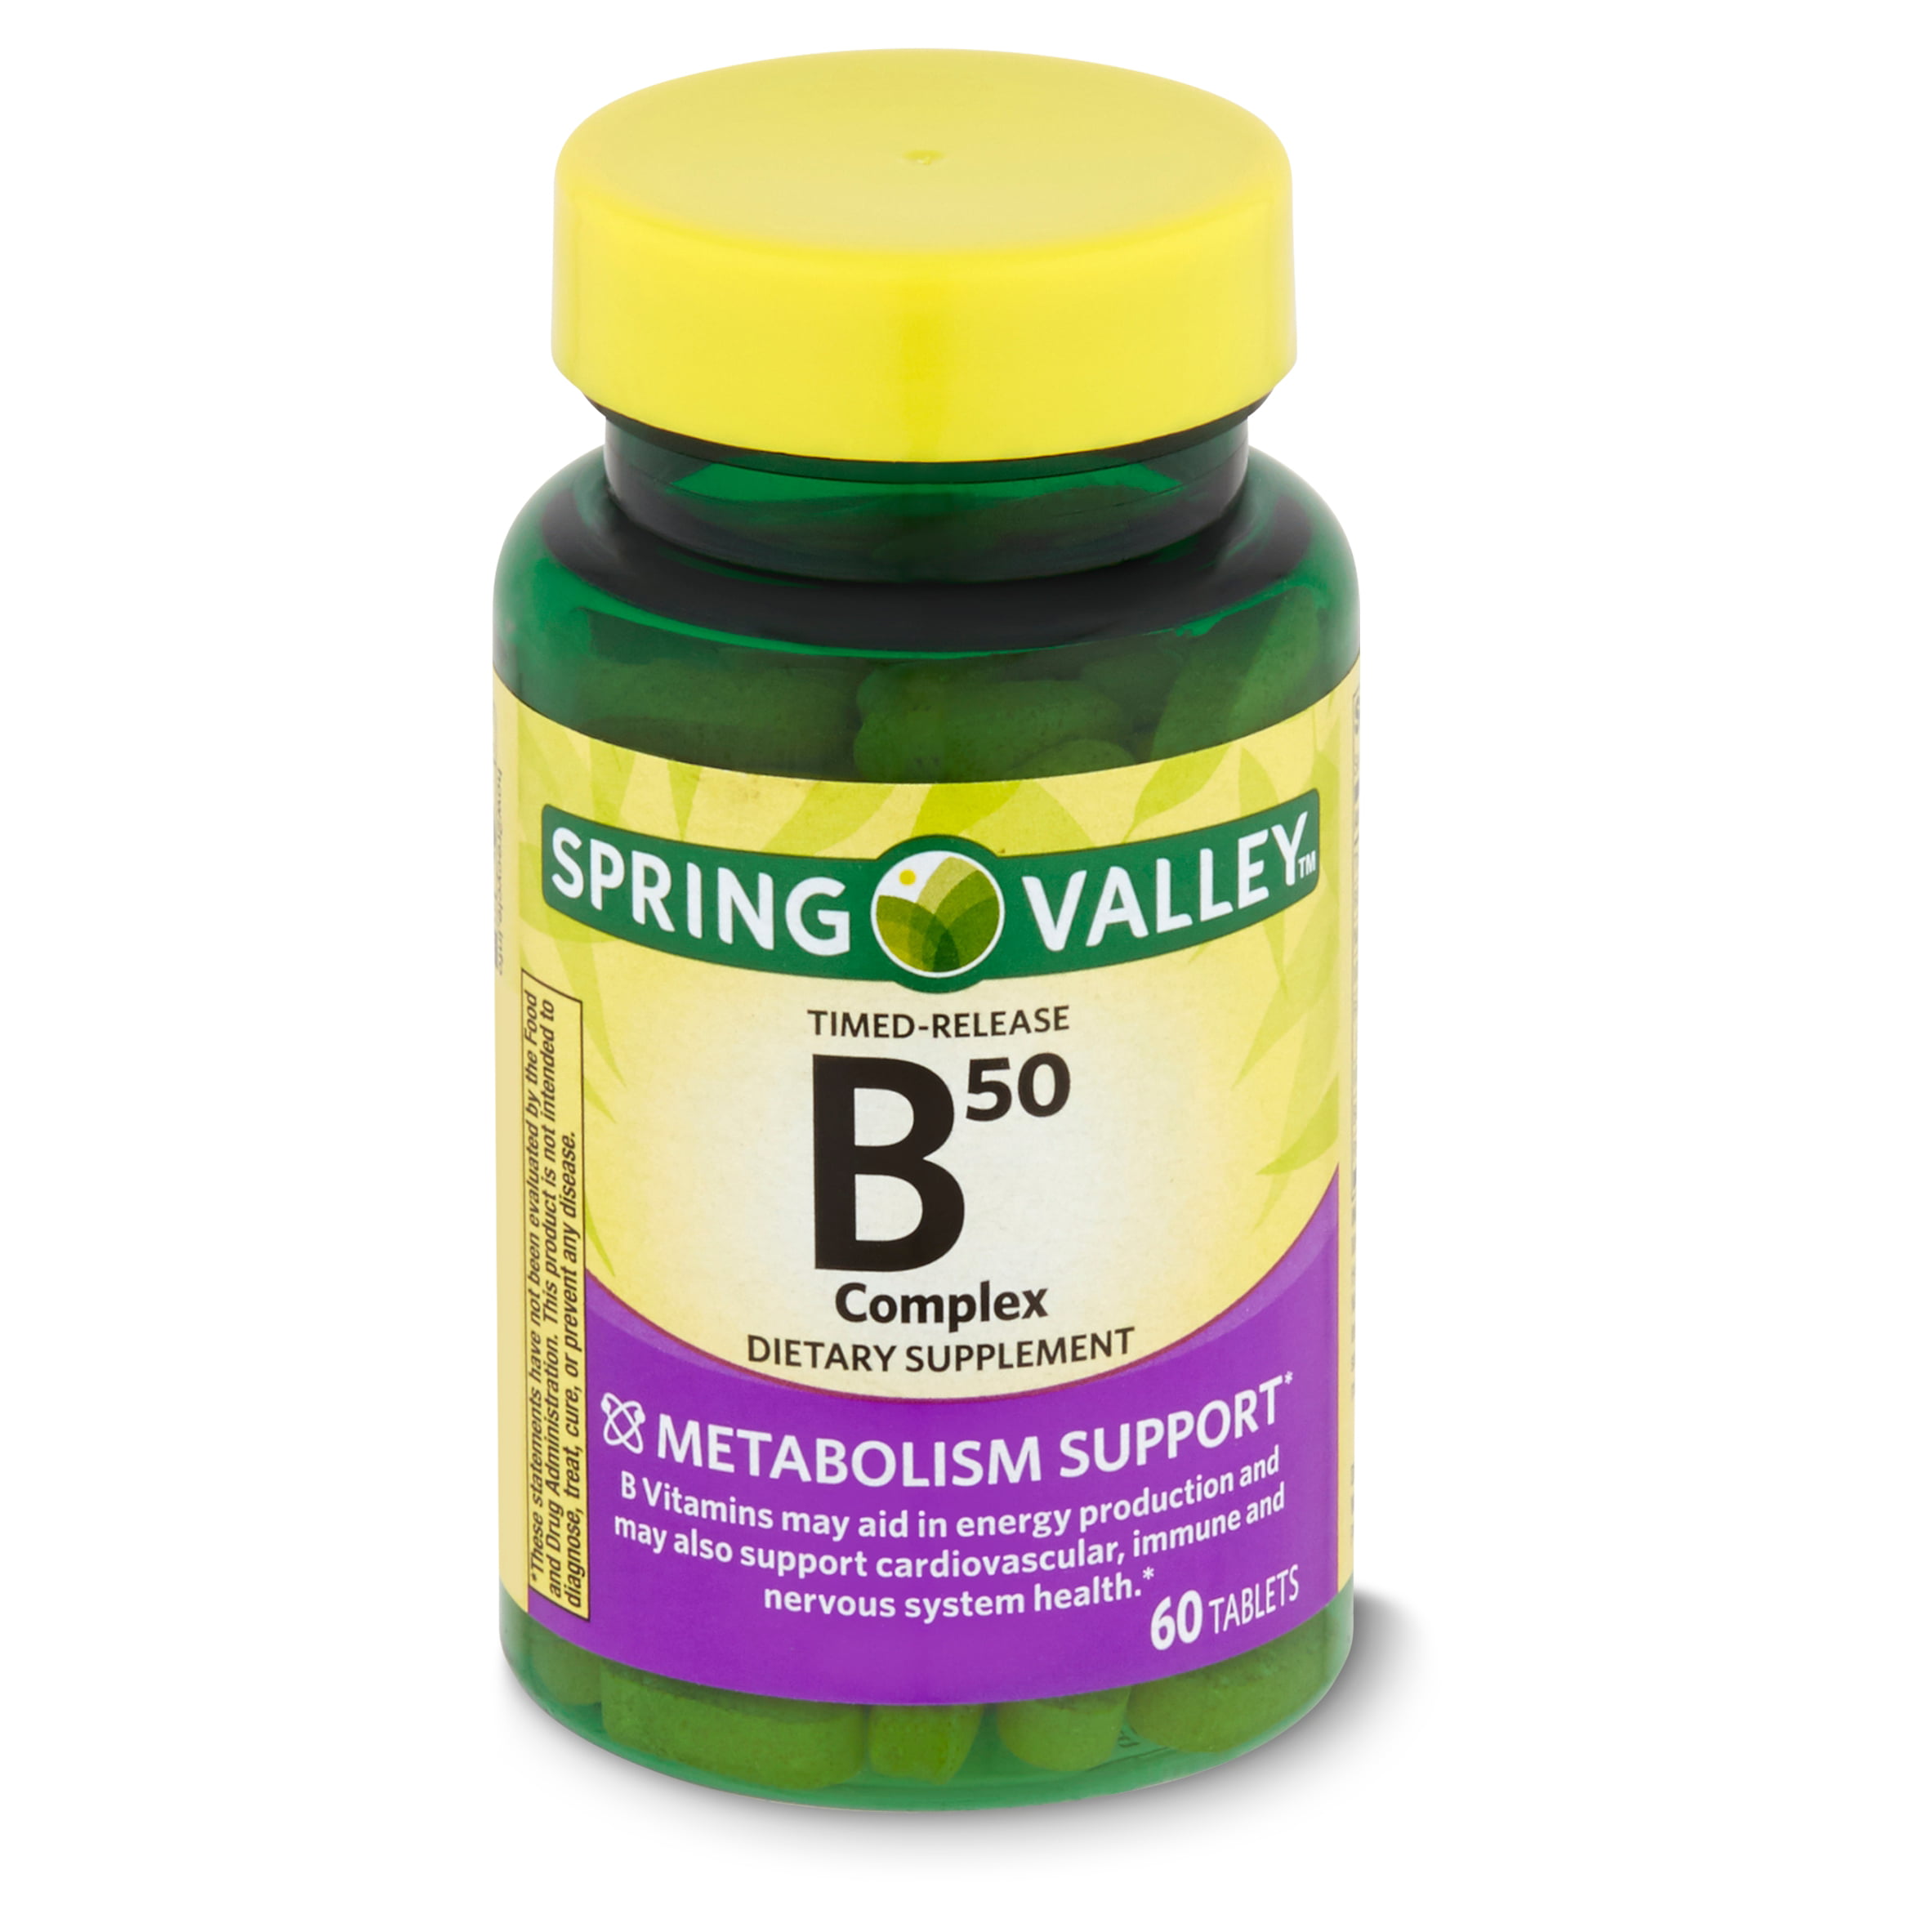 Spring Valley Vitamin B12 Supplement, 500 count